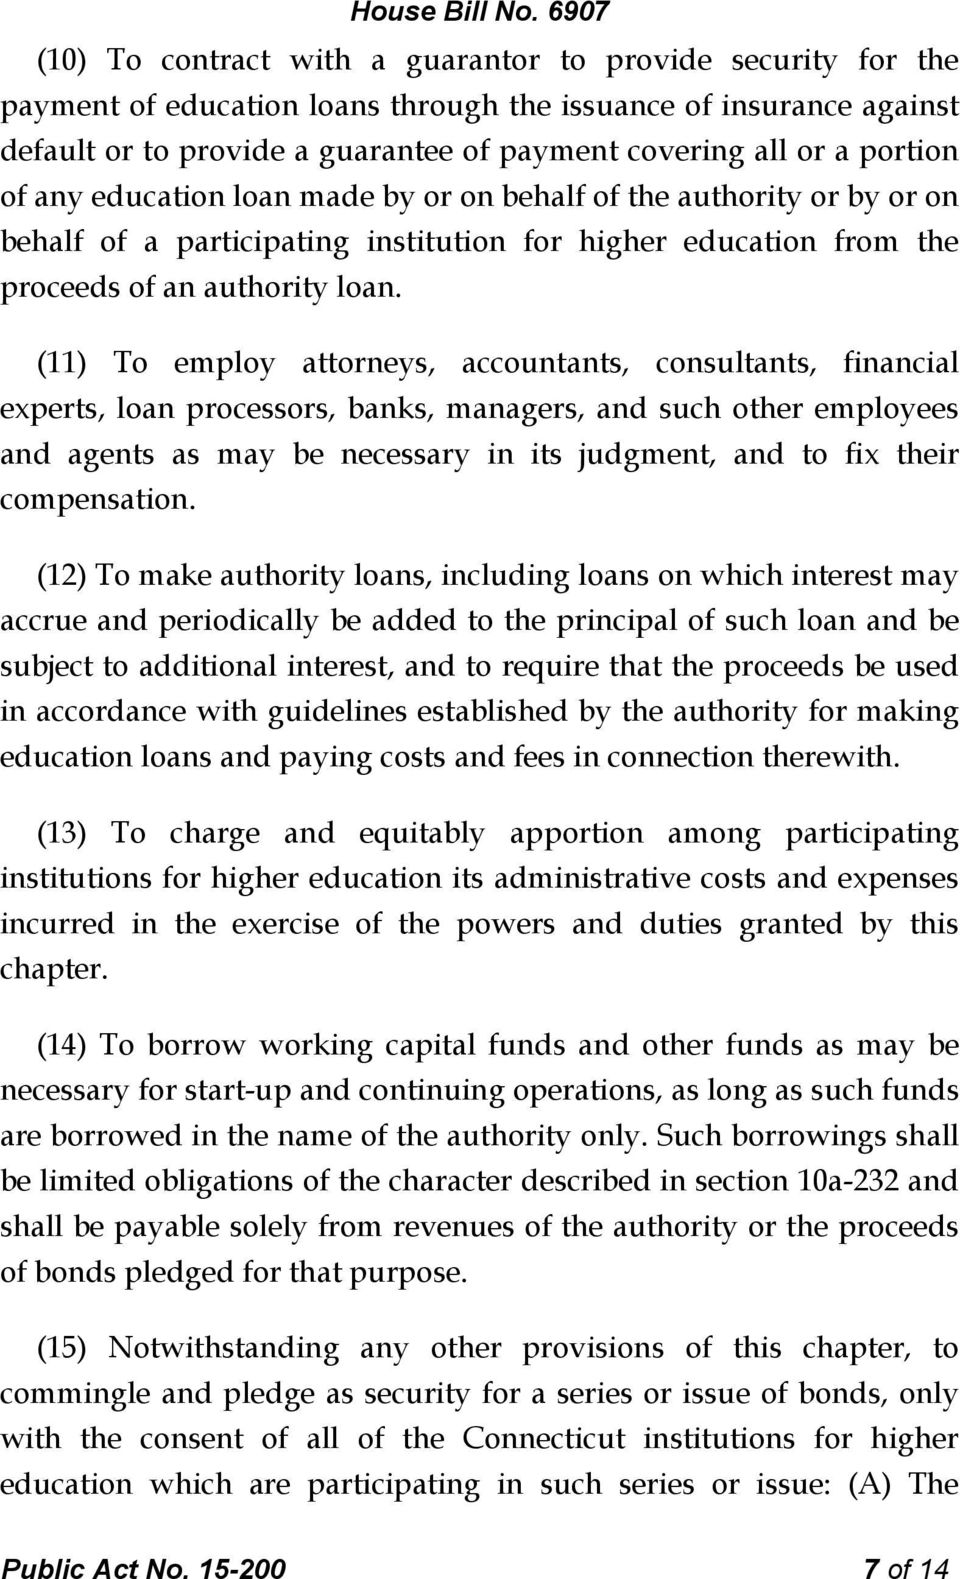 (11) To employ attorneys, accountants, consultants, financial experts, loan processors, banks, managers, and such other employees and agents as may be necessary in its judgment, and to fix their